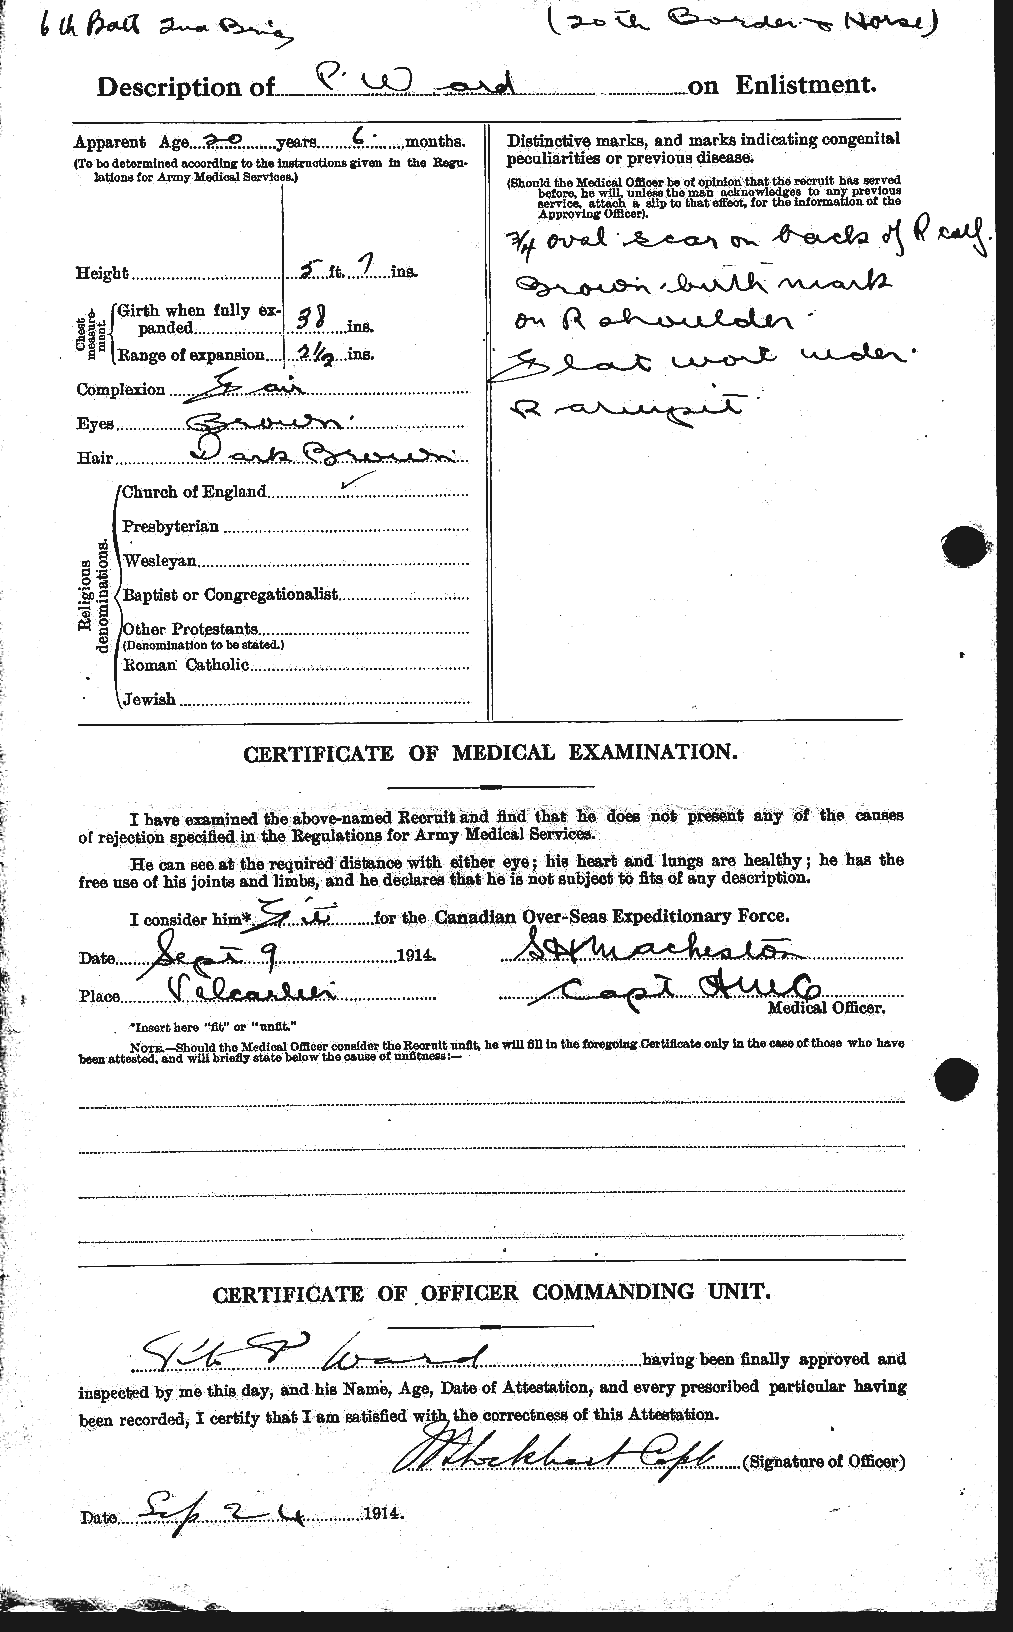 Personnel Records of the First World War - CEF 655102b